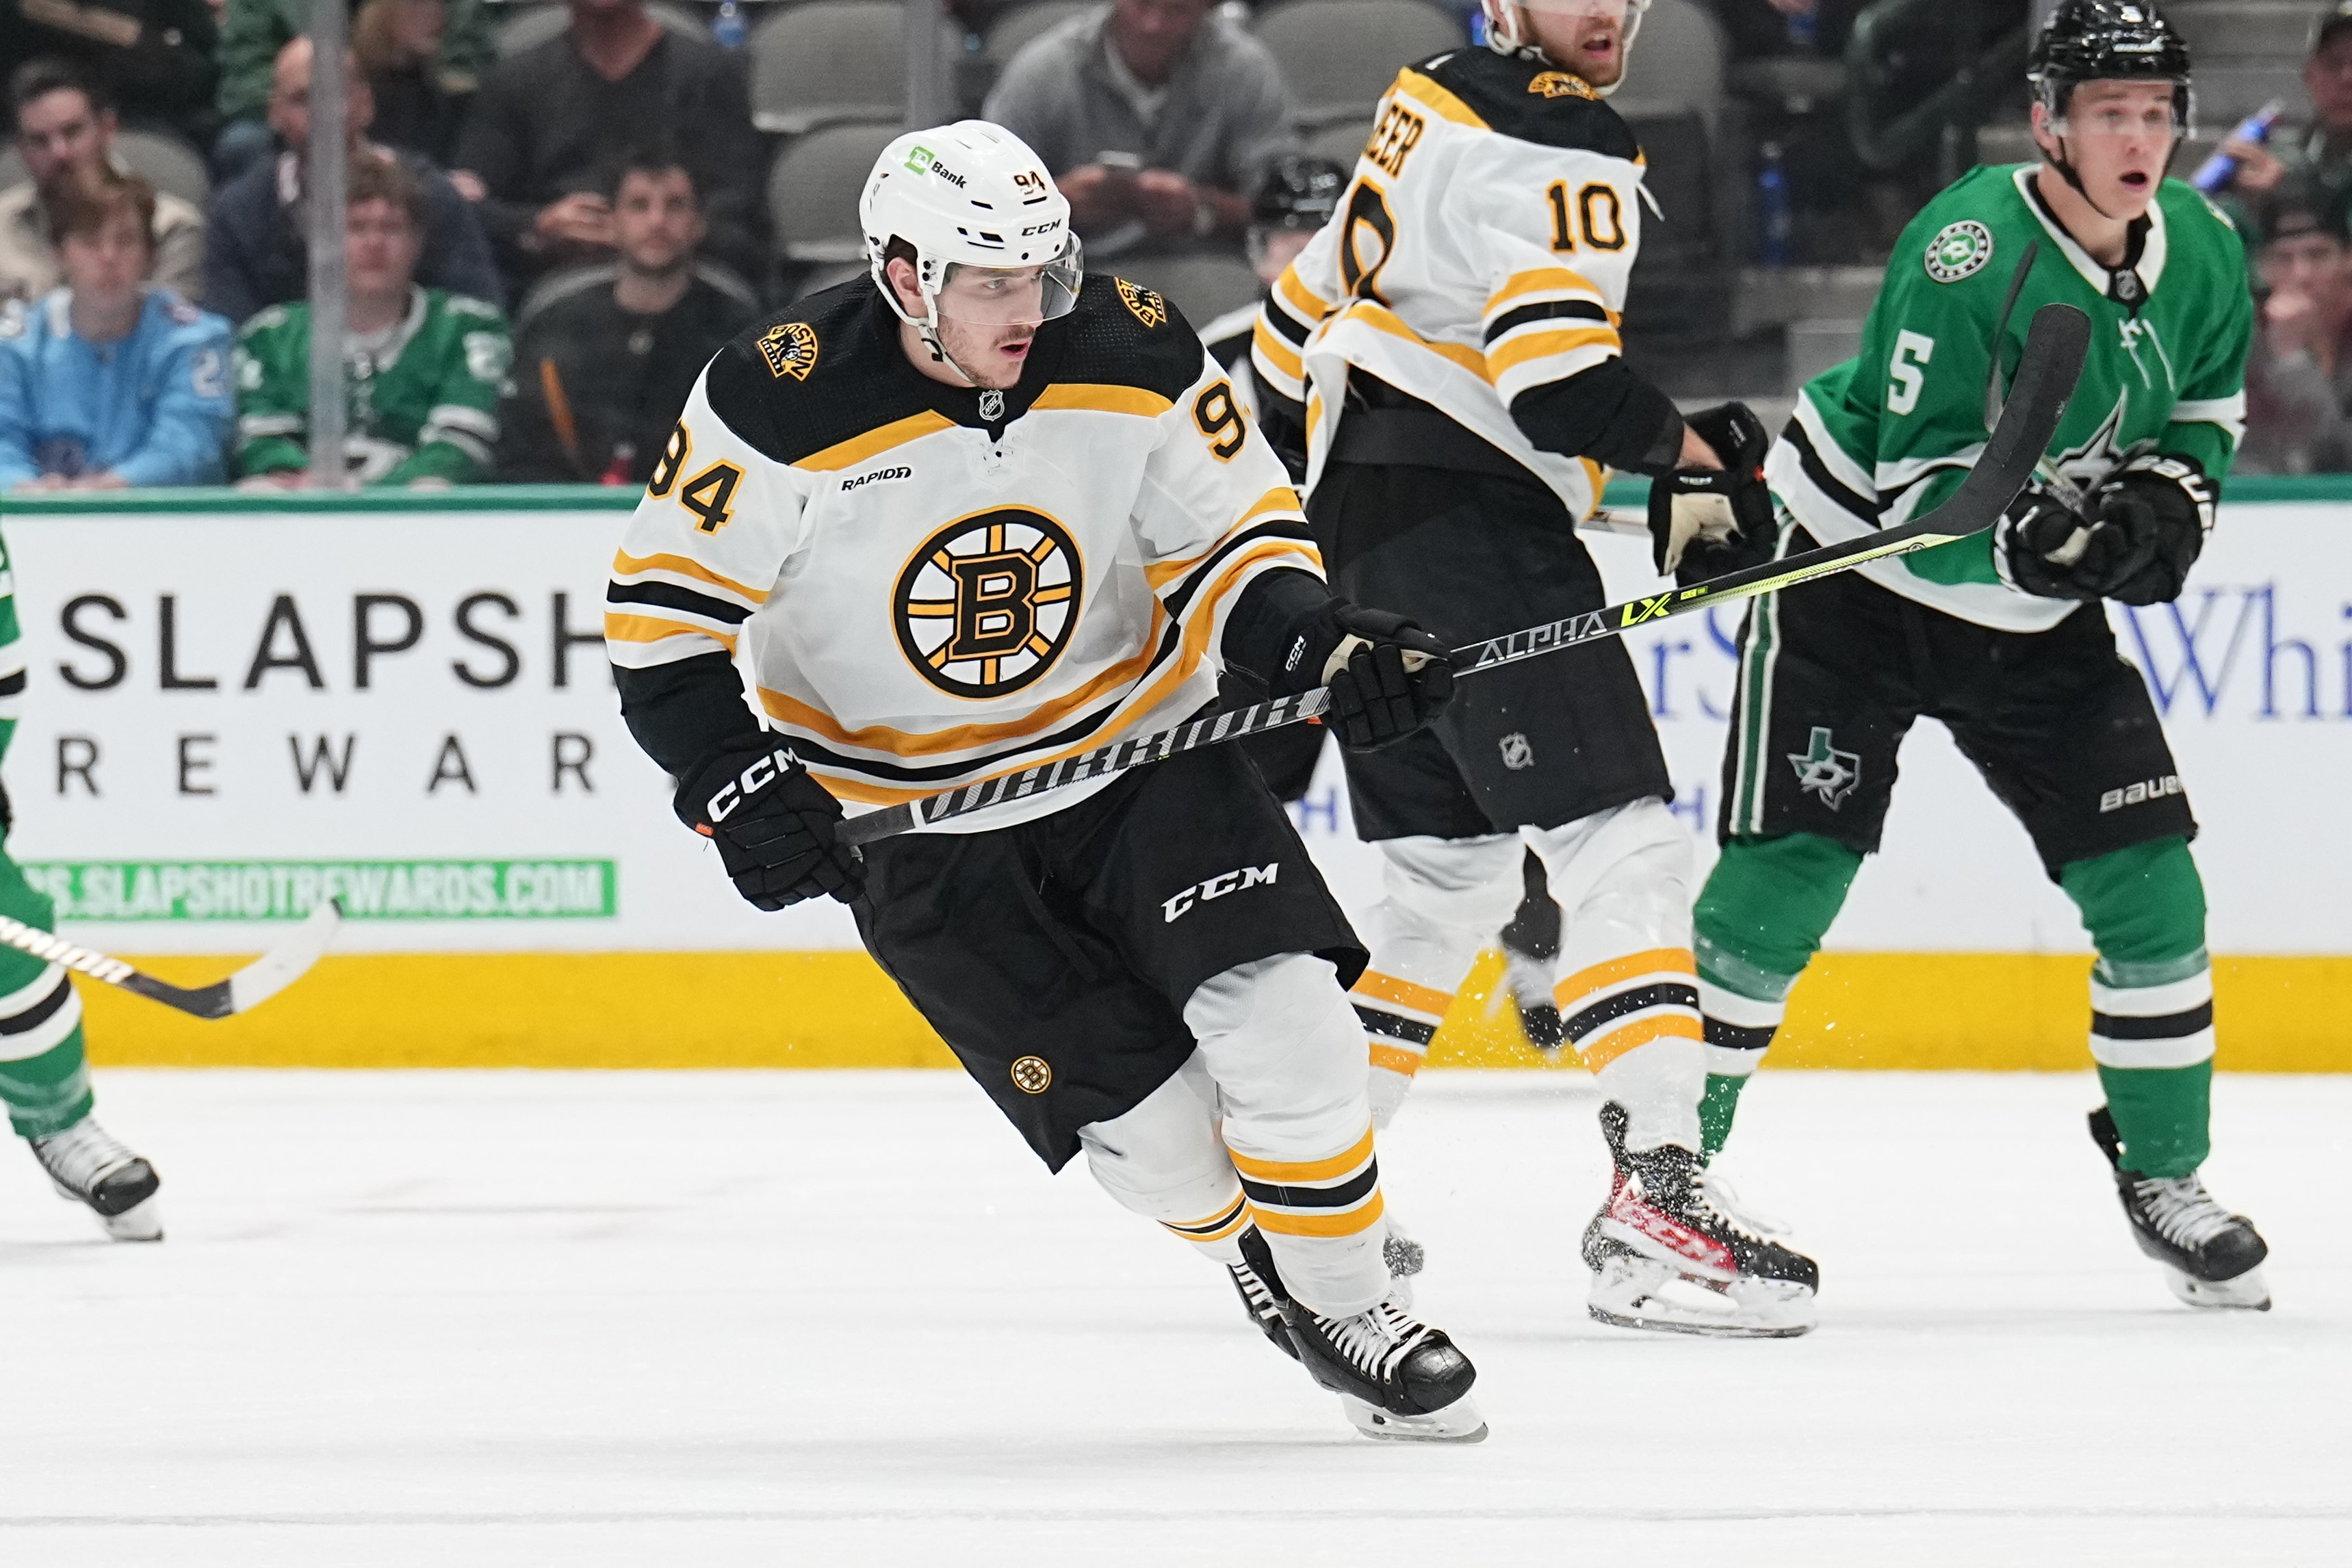 Pastrnak scores in OT as Bruins rally for 3-2 win over Stars - The